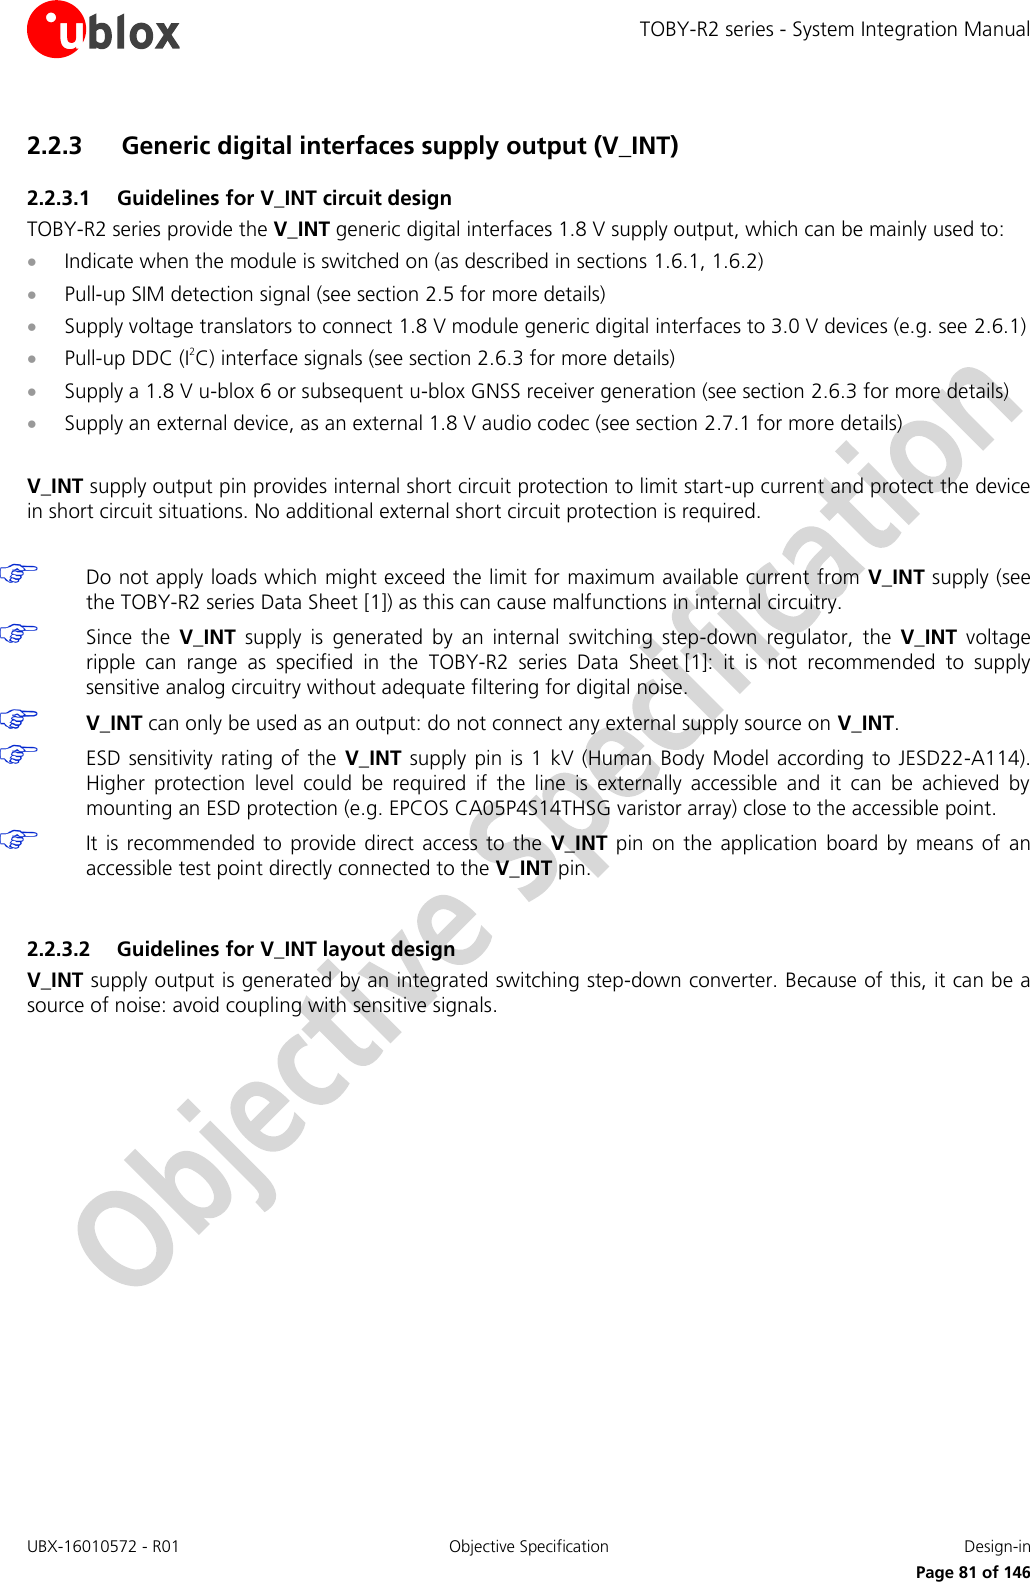 TOBY-R2 series - System Integration Manual UBX-16010572 - R01  Objective Specification  Design-in     Page 81 of 146 2.2.3 Generic digital interfaces supply output (V_INT)  2.2.3.1 Guidelines for V_INT circuit design TOBY-R2 series provide the V_INT generic digital interfaces 1.8 V supply output, which can be mainly used to:  Indicate when the module is switched on (as described in sections 1.6.1, 1.6.2)  Pull-up SIM detection signal (see section 2.5 for more details)  Supply voltage translators to connect 1.8 V module generic digital interfaces to 3.0 V devices (e.g. see 2.6.1)  Pull-up DDC (I2C) interface signals (see section 2.6.3 for more details)  Supply a 1.8 V u-blox 6 or subsequent u-blox GNSS receiver generation (see section 2.6.3 for more details)  Supply an external device, as an external 1.8 V audio codec (see section 2.7.1 for more details)  V_INT supply output pin provides internal short circuit protection to limit start-up current and protect the device in short circuit situations. No additional external short circuit protection is required.   Do not apply loads which might exceed the limit for maximum available current from  V_INT supply (see the TOBY-R2 series Data Sheet [1]) as this can cause malfunctions in internal circuitry.  Since  the  V_INT  supply  is  generated  by  an  internal  switching  step-down  regulator,  the  V_INT  voltage ripple  can  range  as  specified  in  the  TOBY-R2  series Data  Sheet [1]:  it  is  not  recommended  to  supply sensitive analog circuitry without adequate filtering for digital noise.  V_INT can only be used as an output: do not connect any external supply source on V_INT.  ESD sensitivity rating  of  the  V_INT supply pin is 1  kV  (Human Body  Model according to JESD22-A114). Higher  protection  level  could  be  required  if  the  line  is  externally  accessible  and  it  can  be  achieved  by mounting an ESD protection (e.g. EPCOS CA05P4S14THSG varistor array) close to the accessible point.  It is  recommended  to provide  direct access  to the  V_INT  pin on  the  application  board by  means  of  an accessible test point directly connected to the V_INT pin.  2.2.3.2 Guidelines for V_INT layout design V_INT supply output is generated by an integrated switching step-down converter. Because of this, it can be a source of noise: avoid coupling with sensitive signals.  